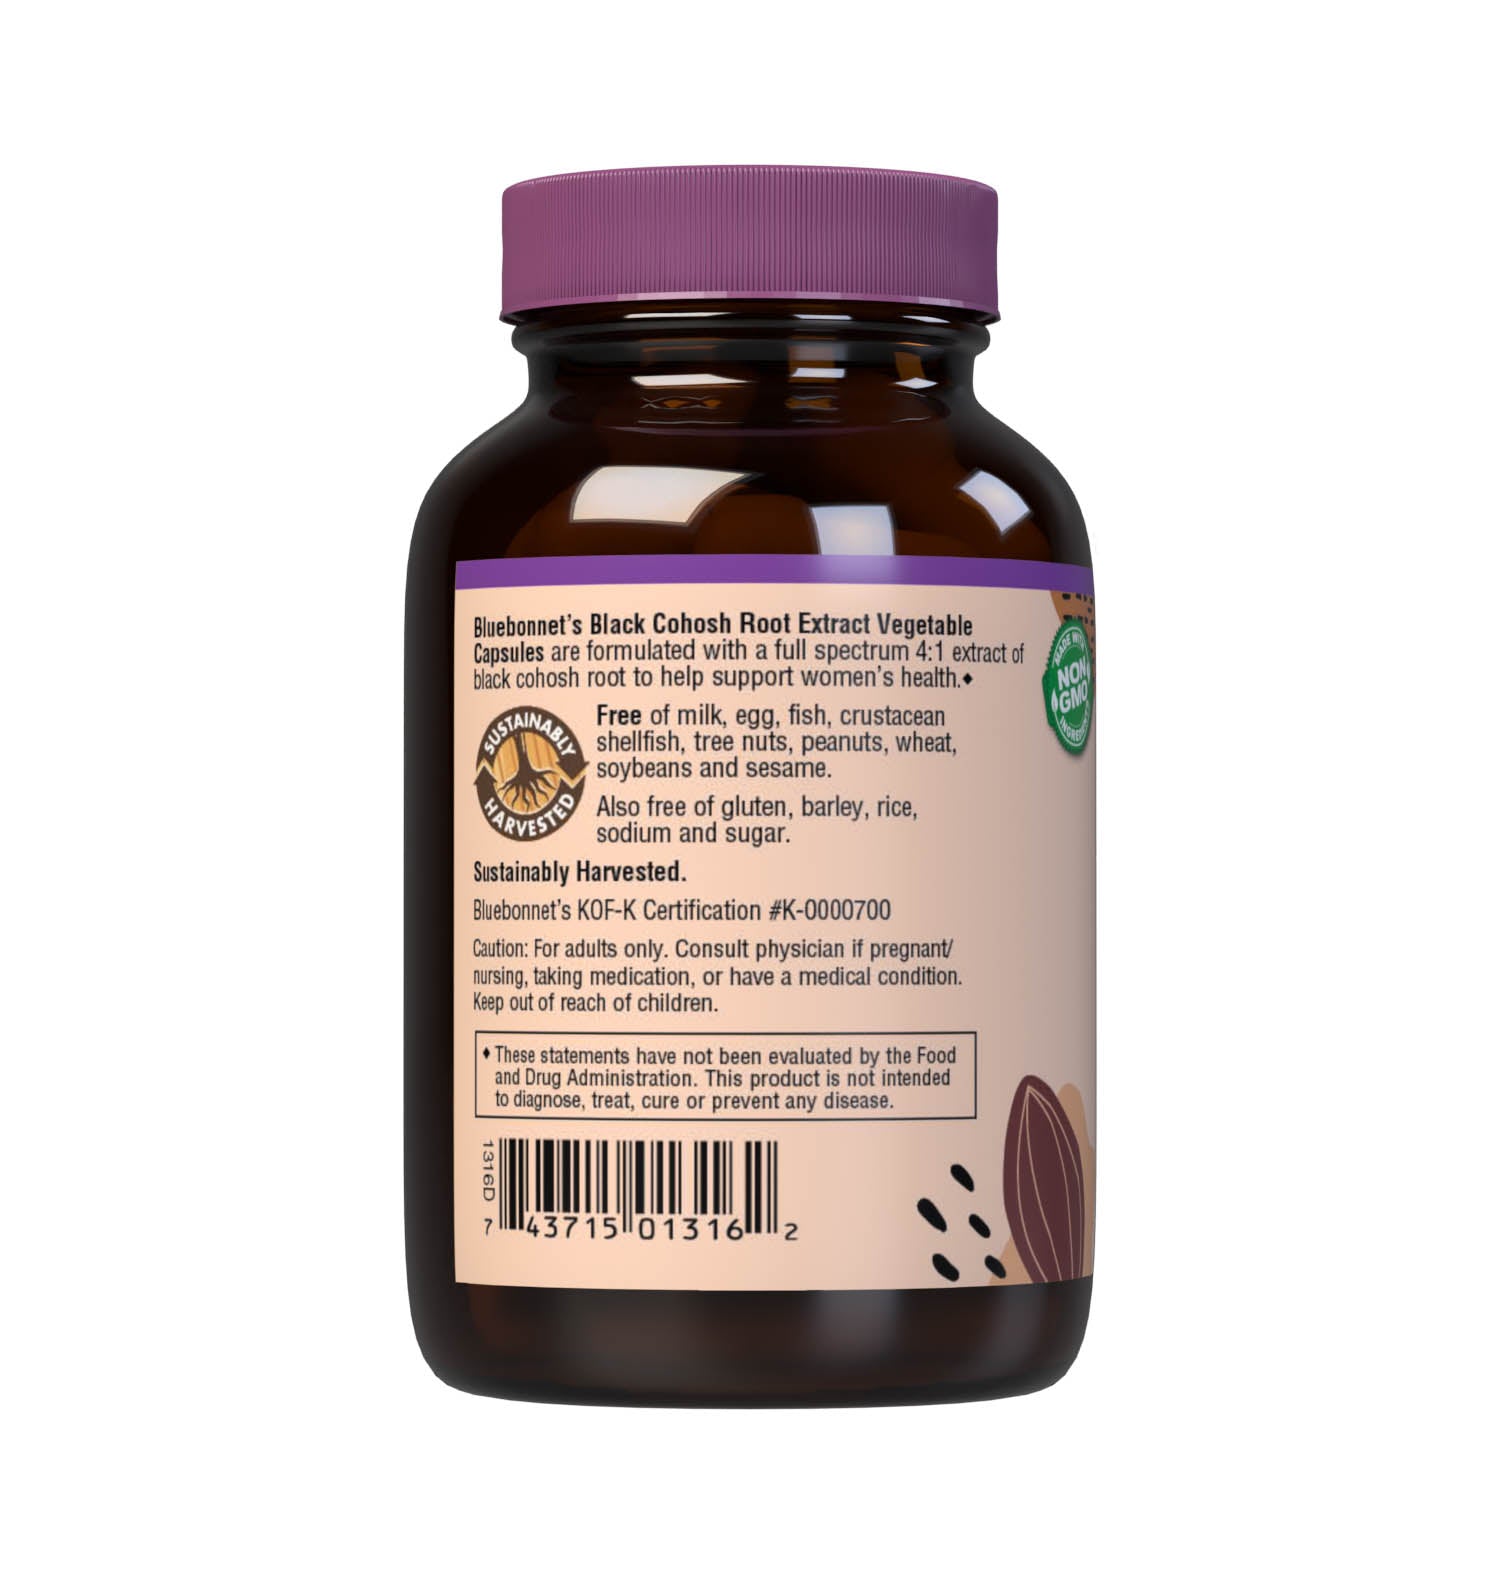 Bluebonnet’s Black Cohosh Root Extract 60 Vegetable Capsules are formulated with a full spectrum extract of black cohosh root to help support women's health. A clean and gentle water-based extraction method is employed to capture annd preserve black cohosh's most valuable components. Description panel. #size_60 count